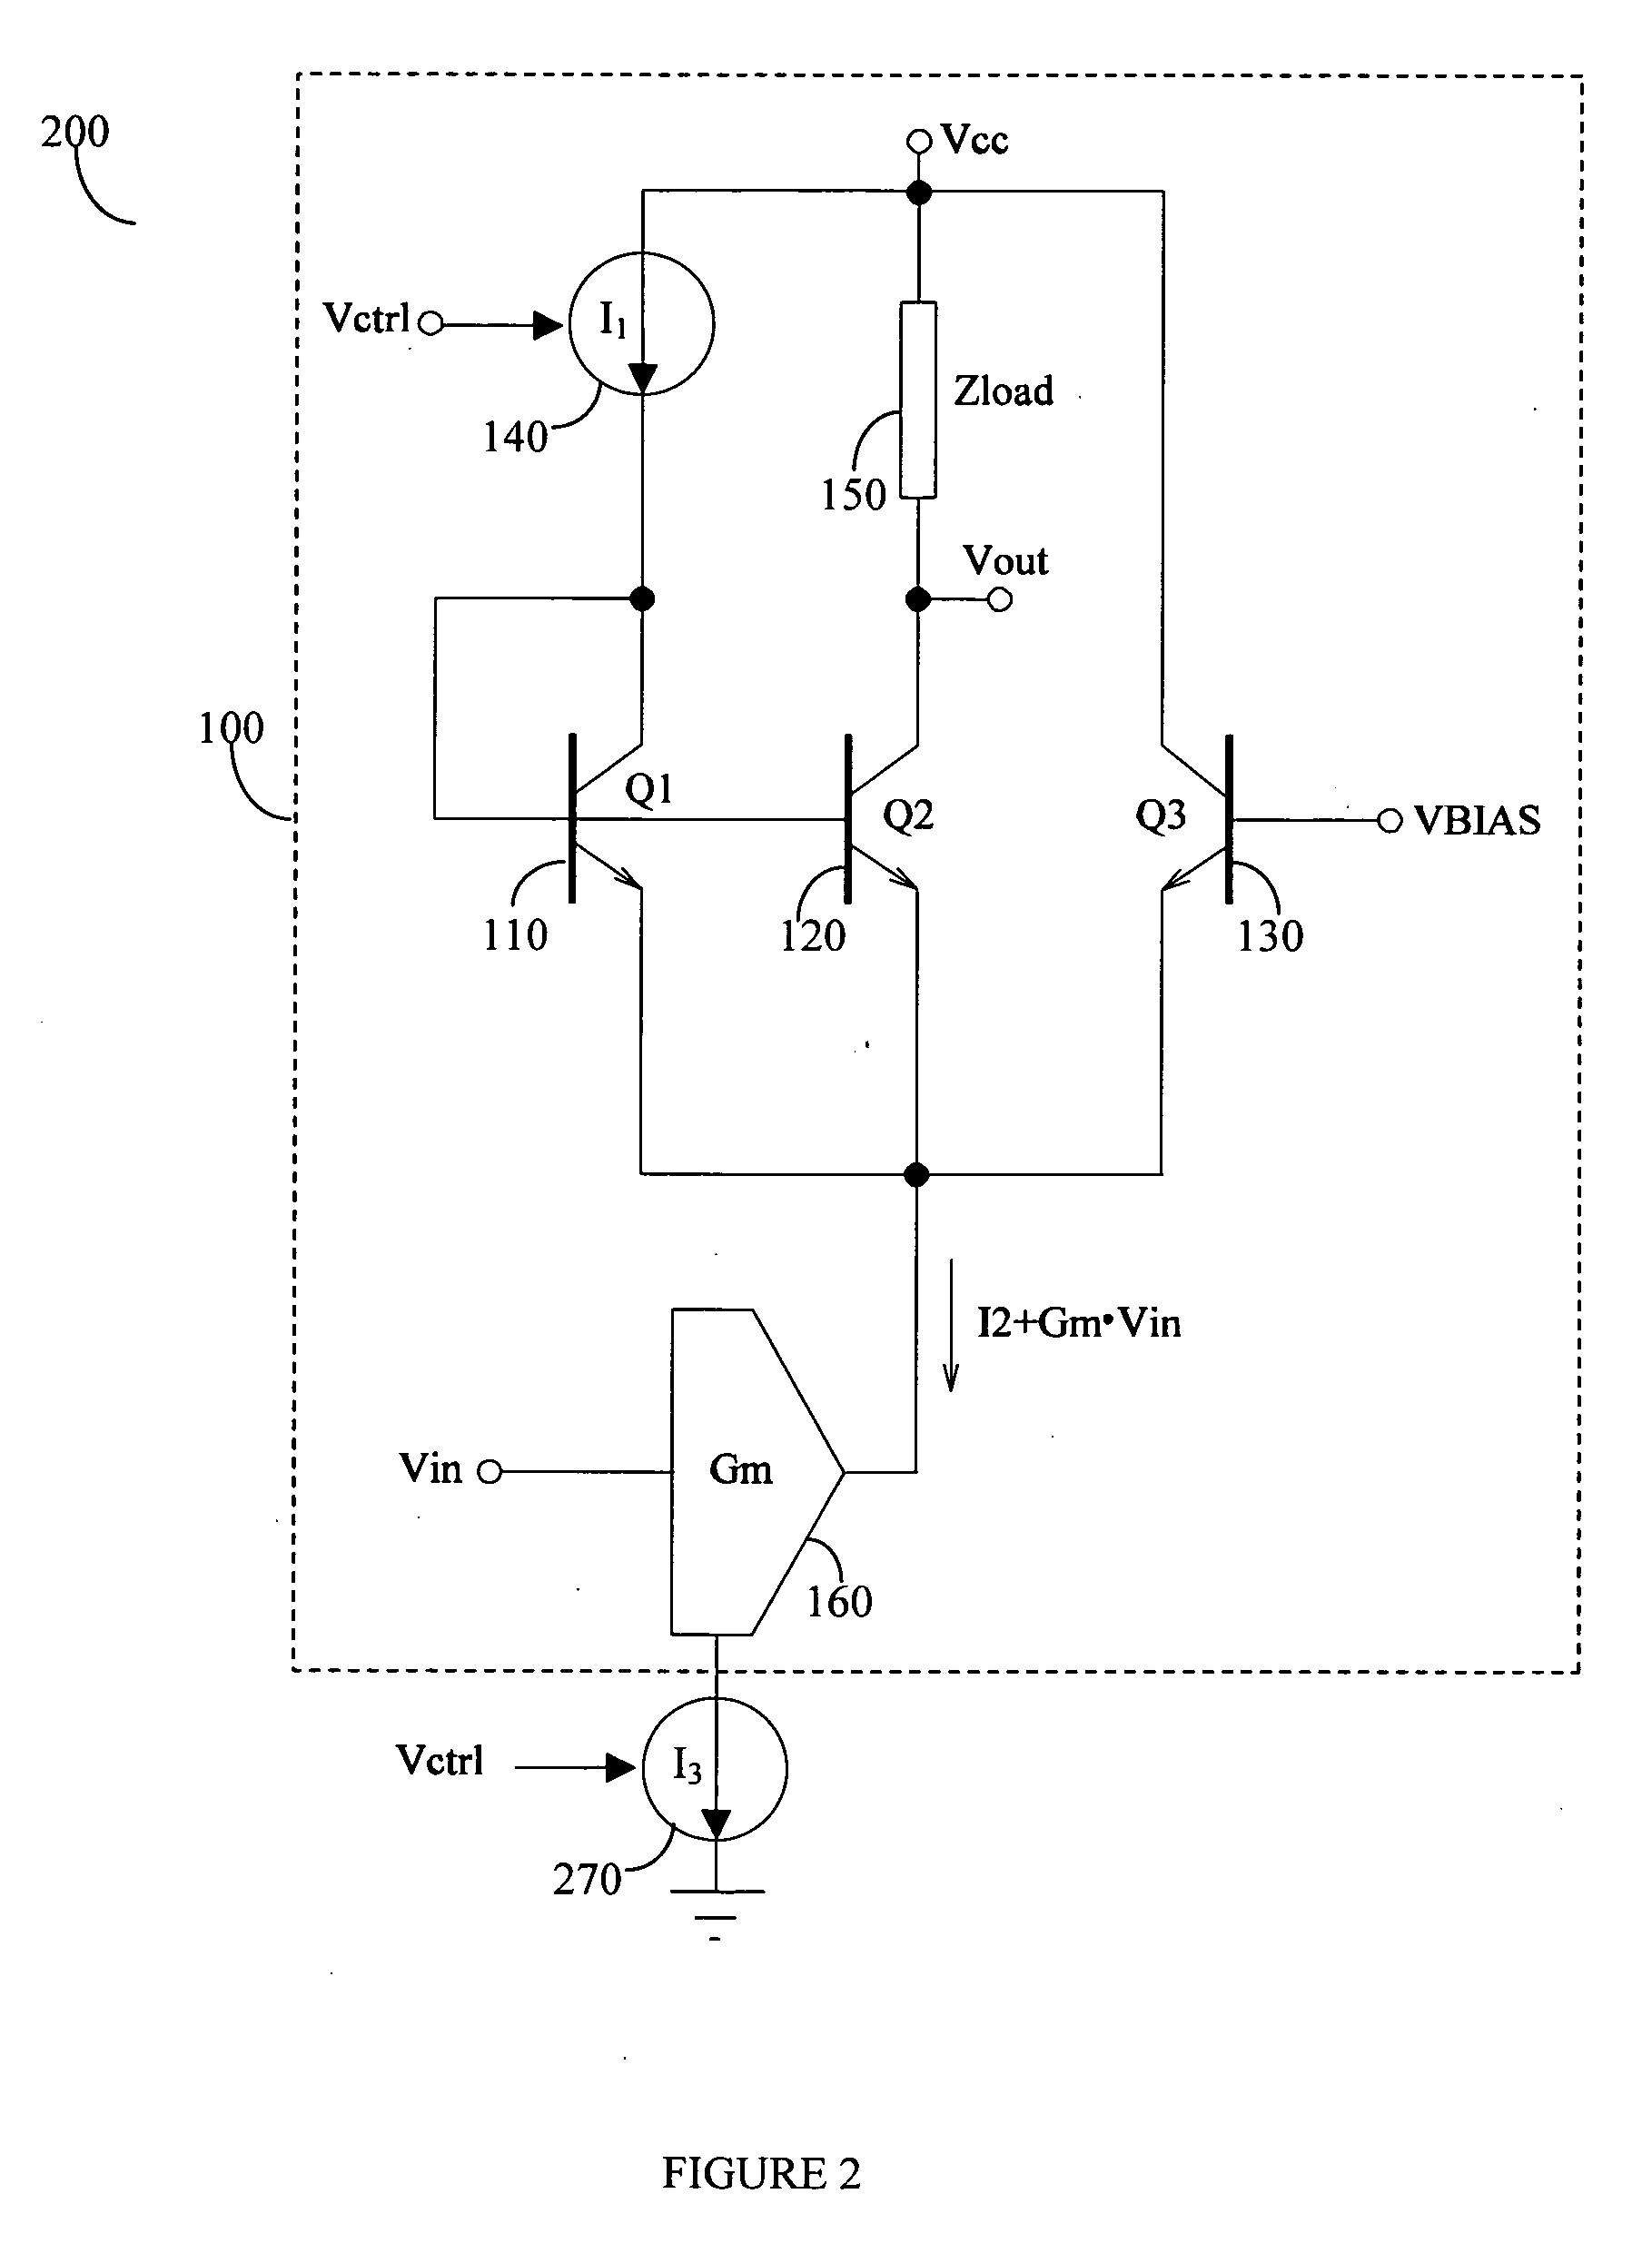 Linear-in-dB variable gain amplifiers with an adaptive bias current